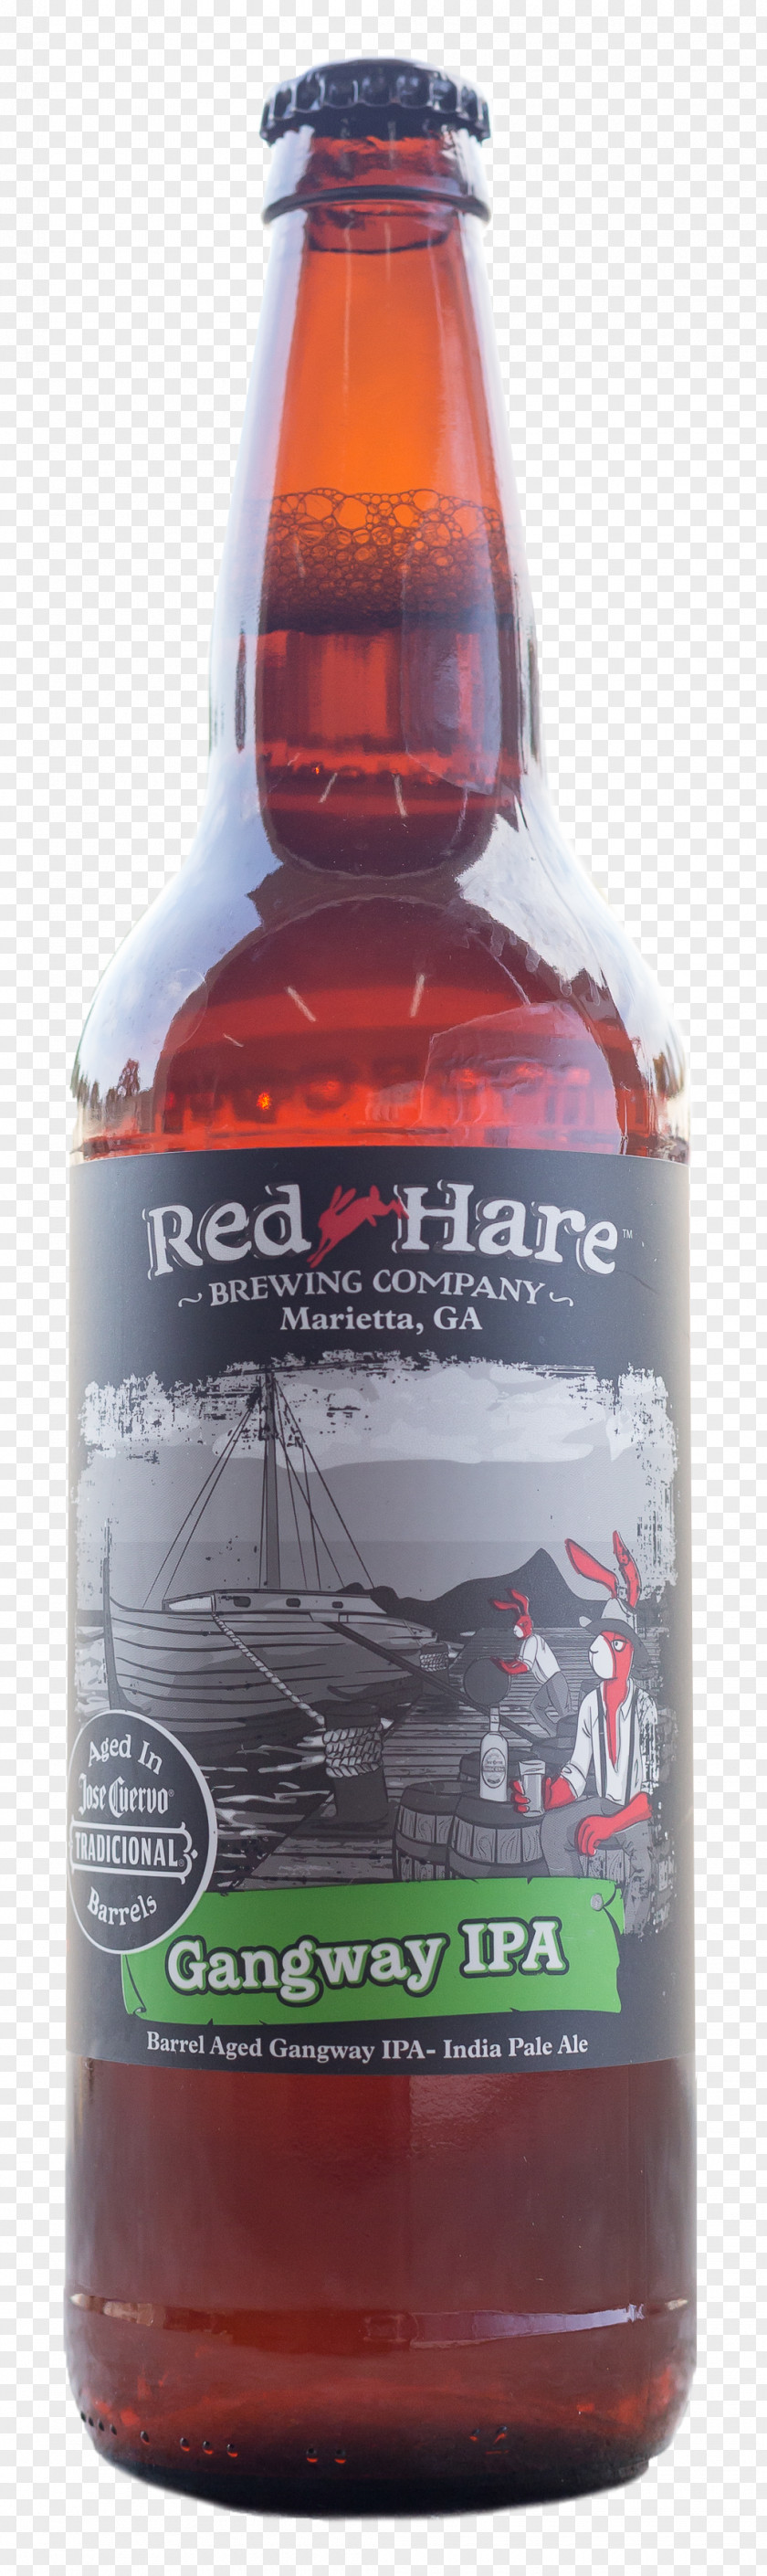 Beer India Pale Ale Red Hare Brewing Company Glass Bottle PNG